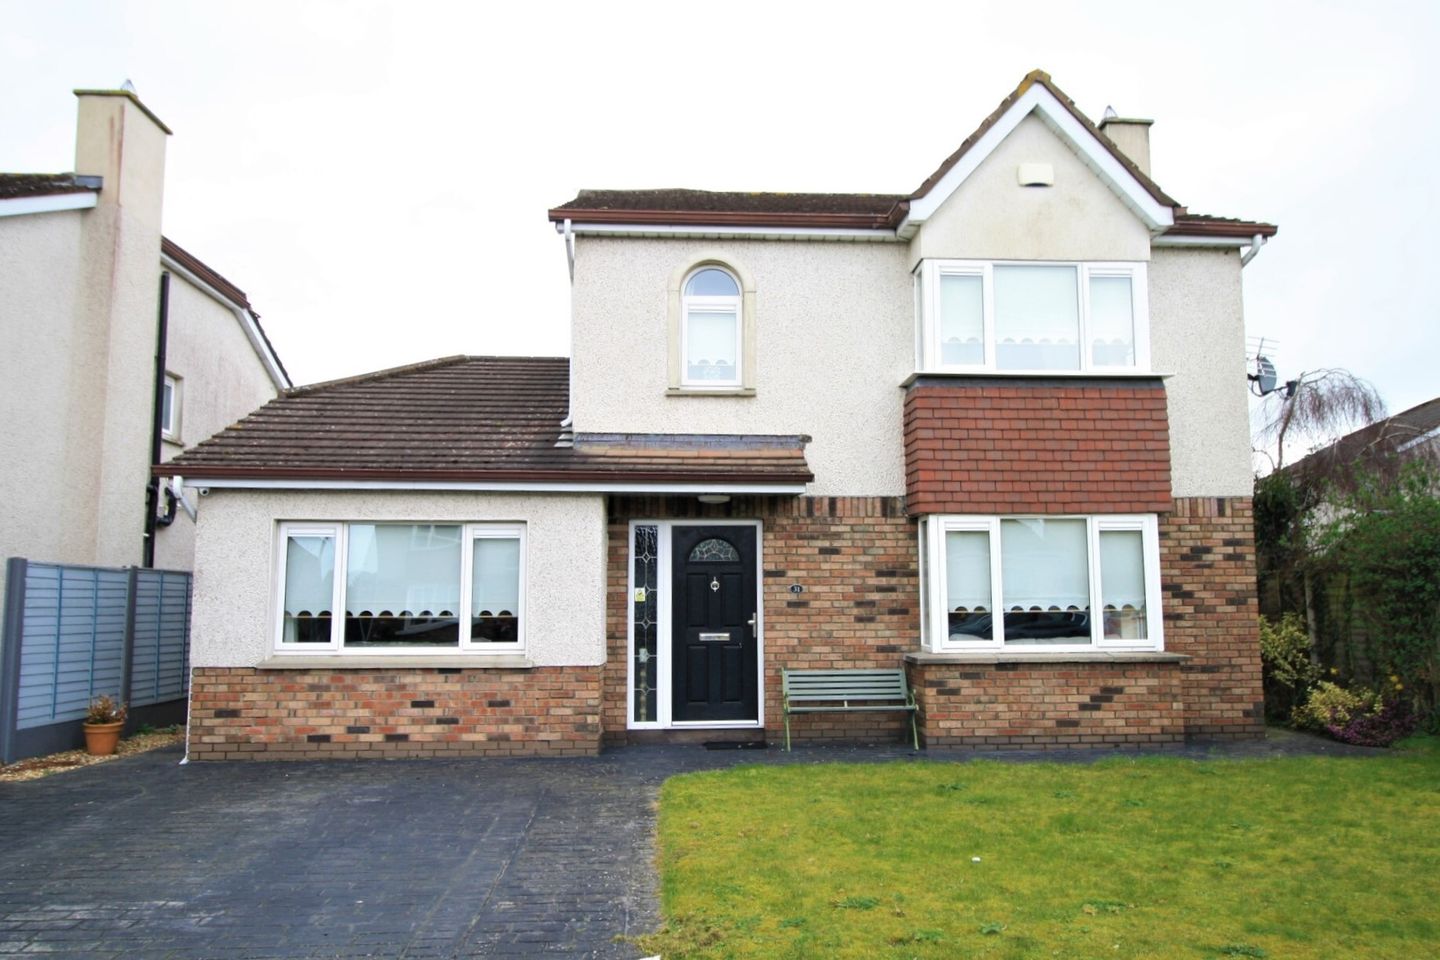 31 The Willows, Pollerton Road, Carlow, Carlow Town, Co. Carlow